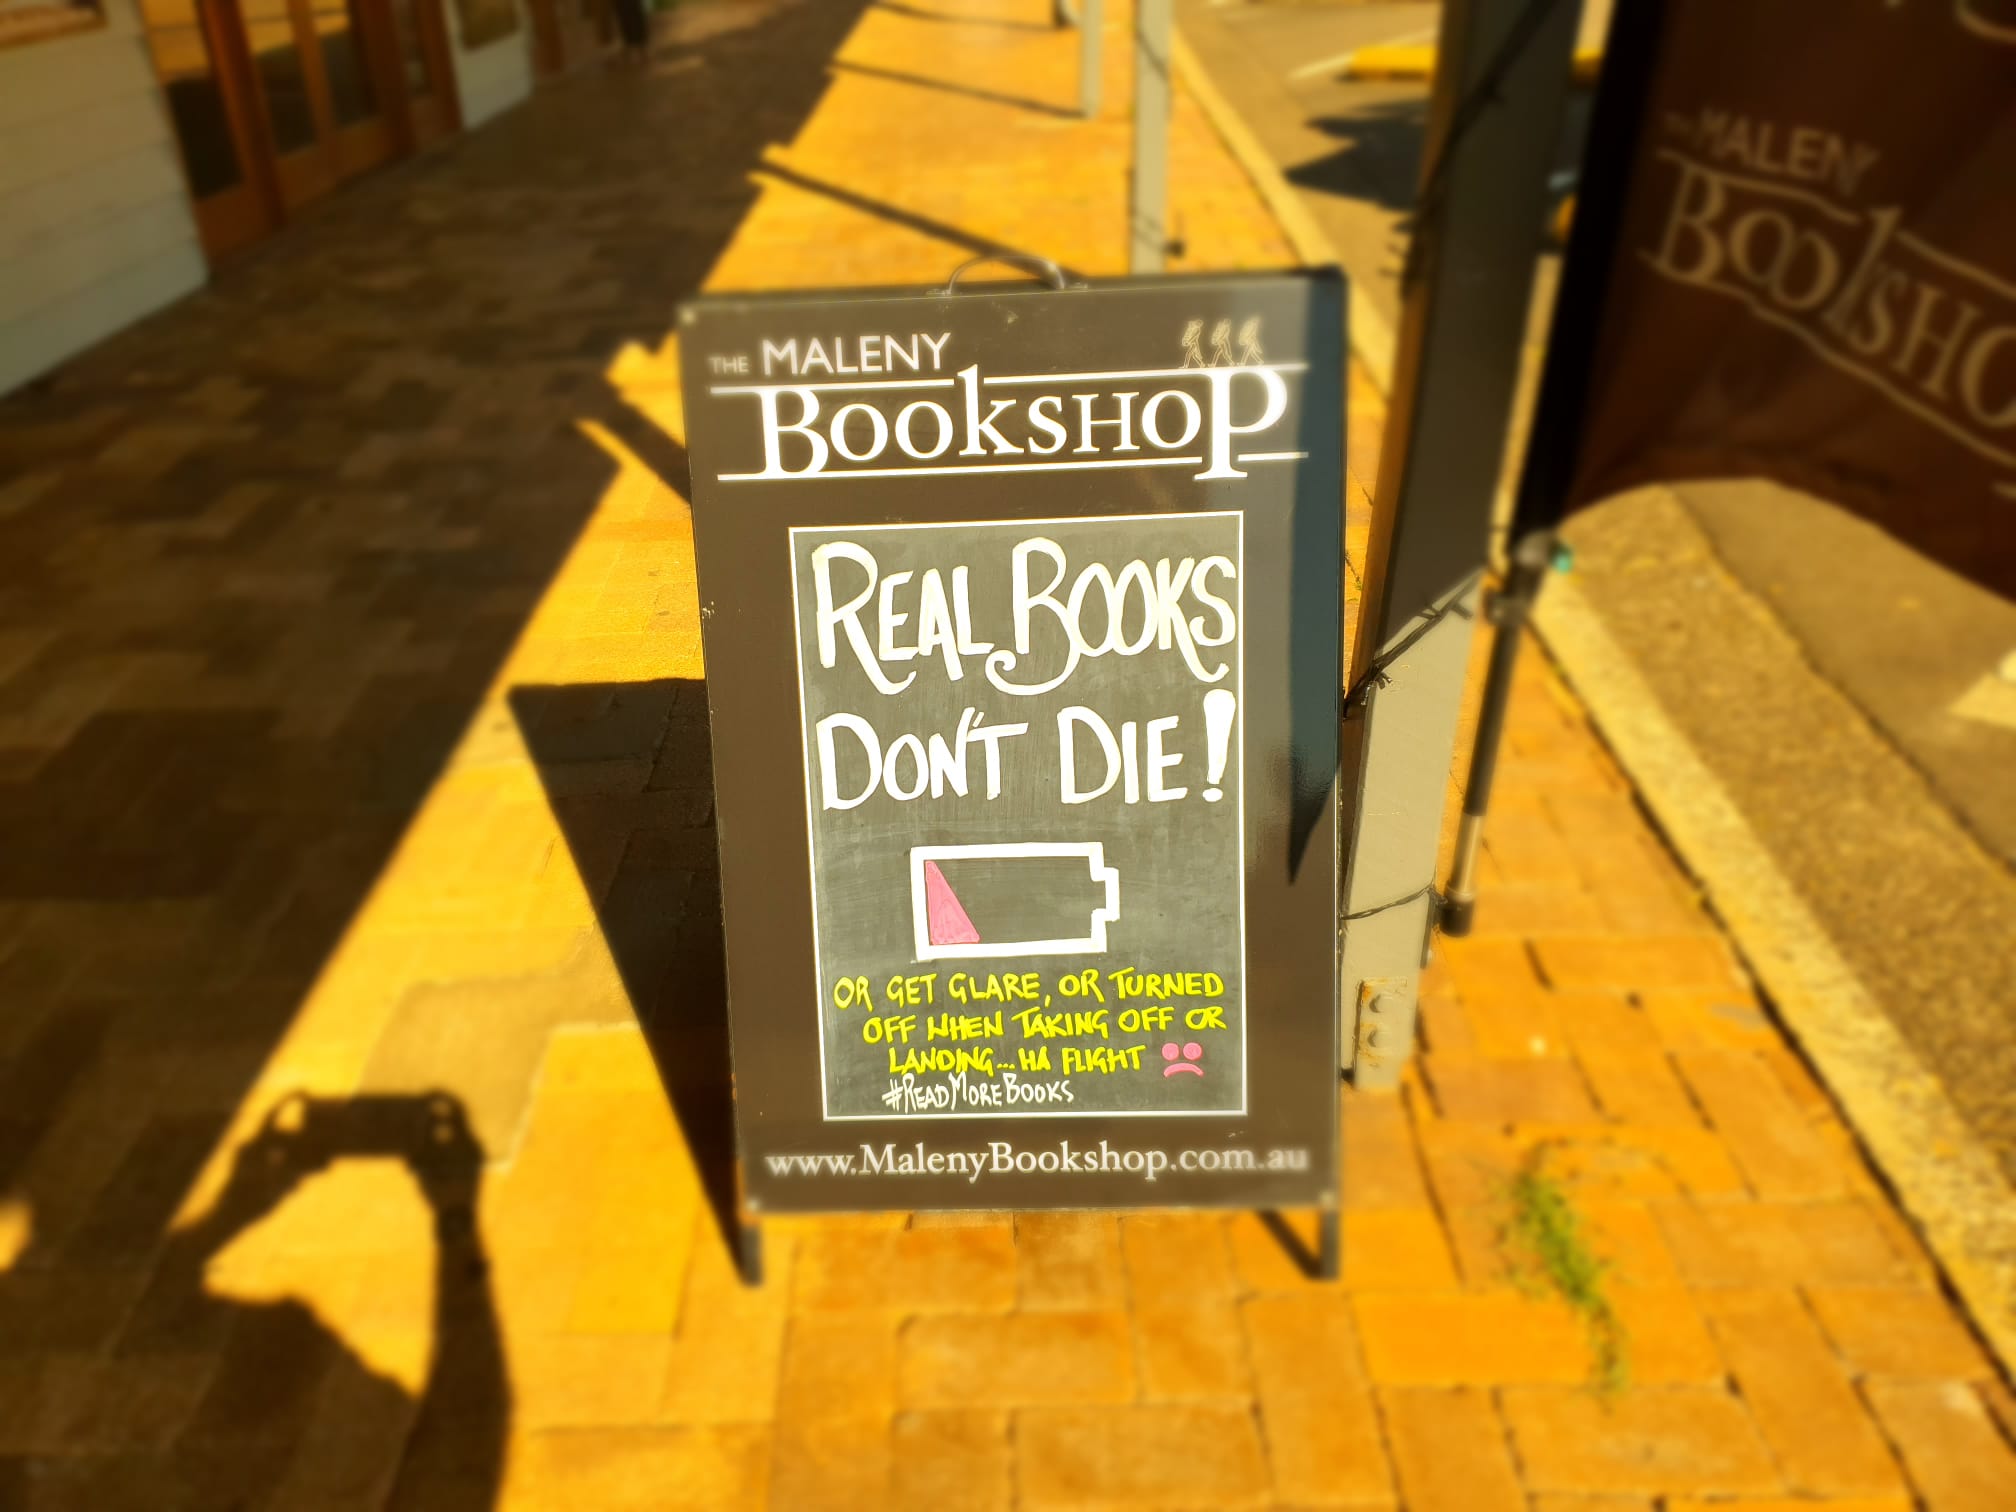 Real books don't die